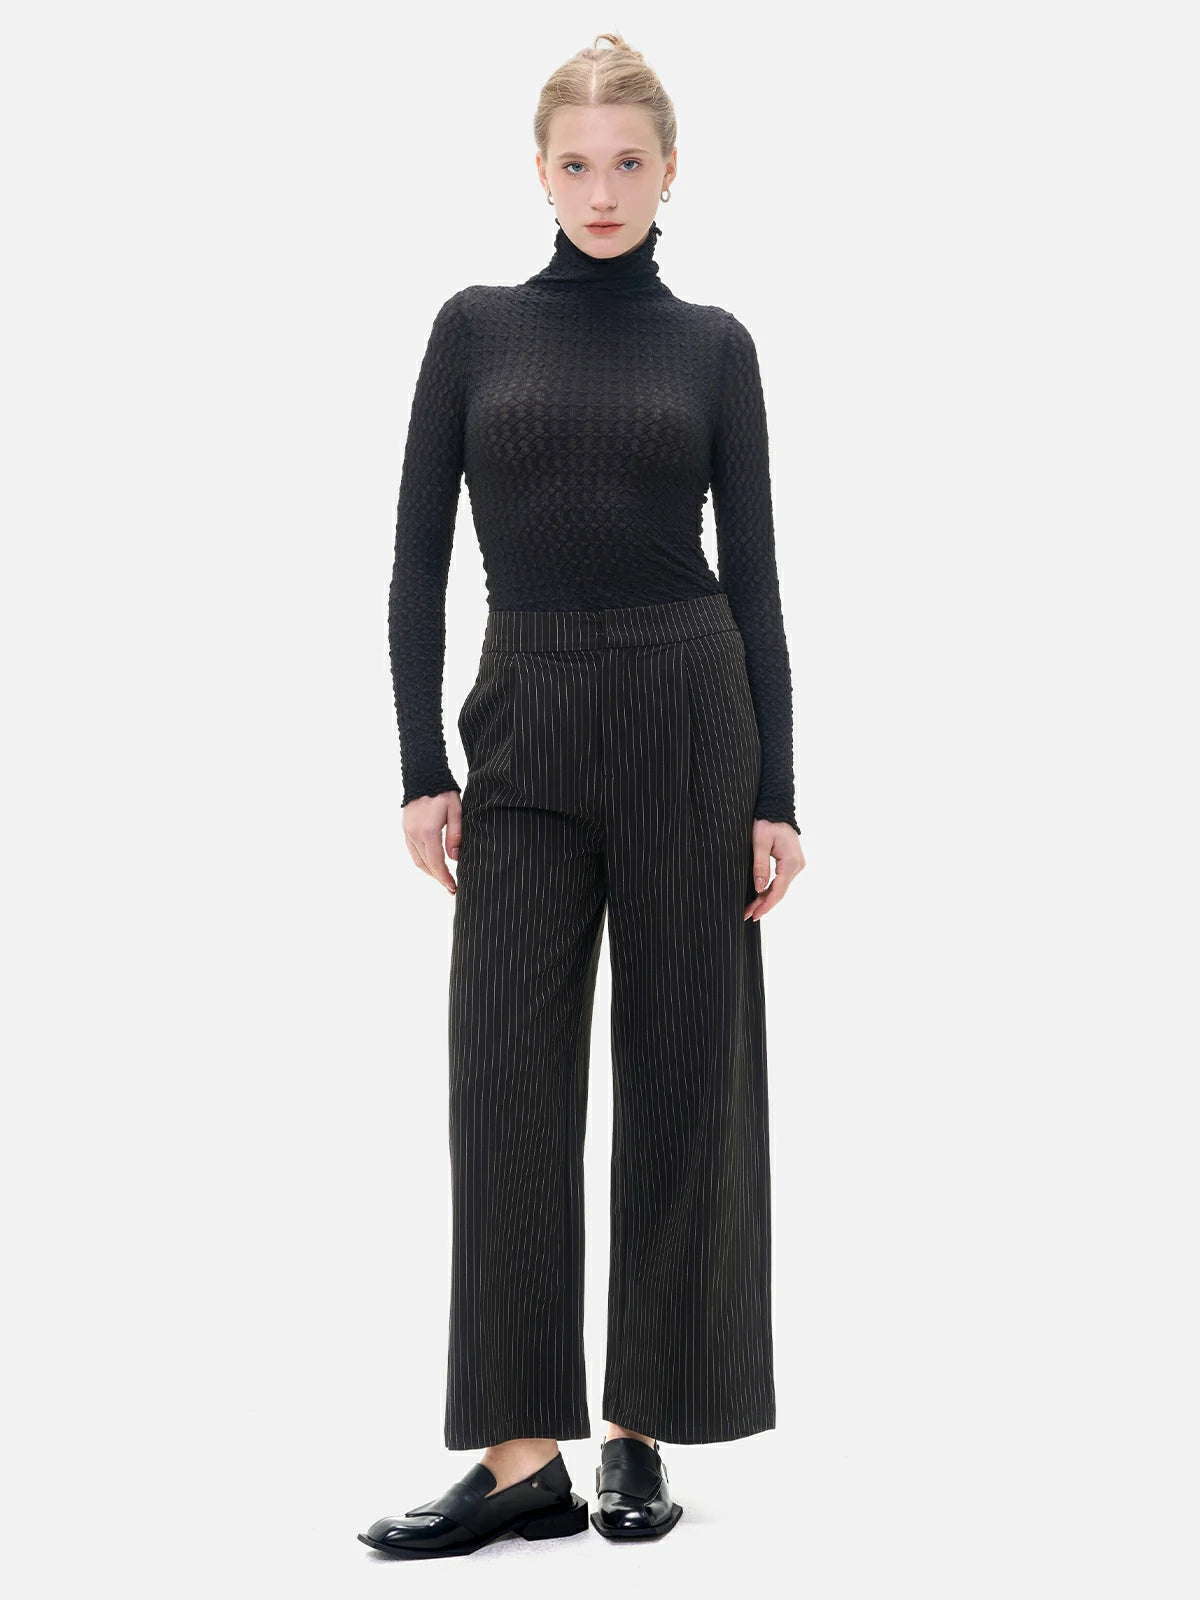 Make a statement in these fashionable comfort wide-leg trousers, showcasing a classic vertical stripe pattern.